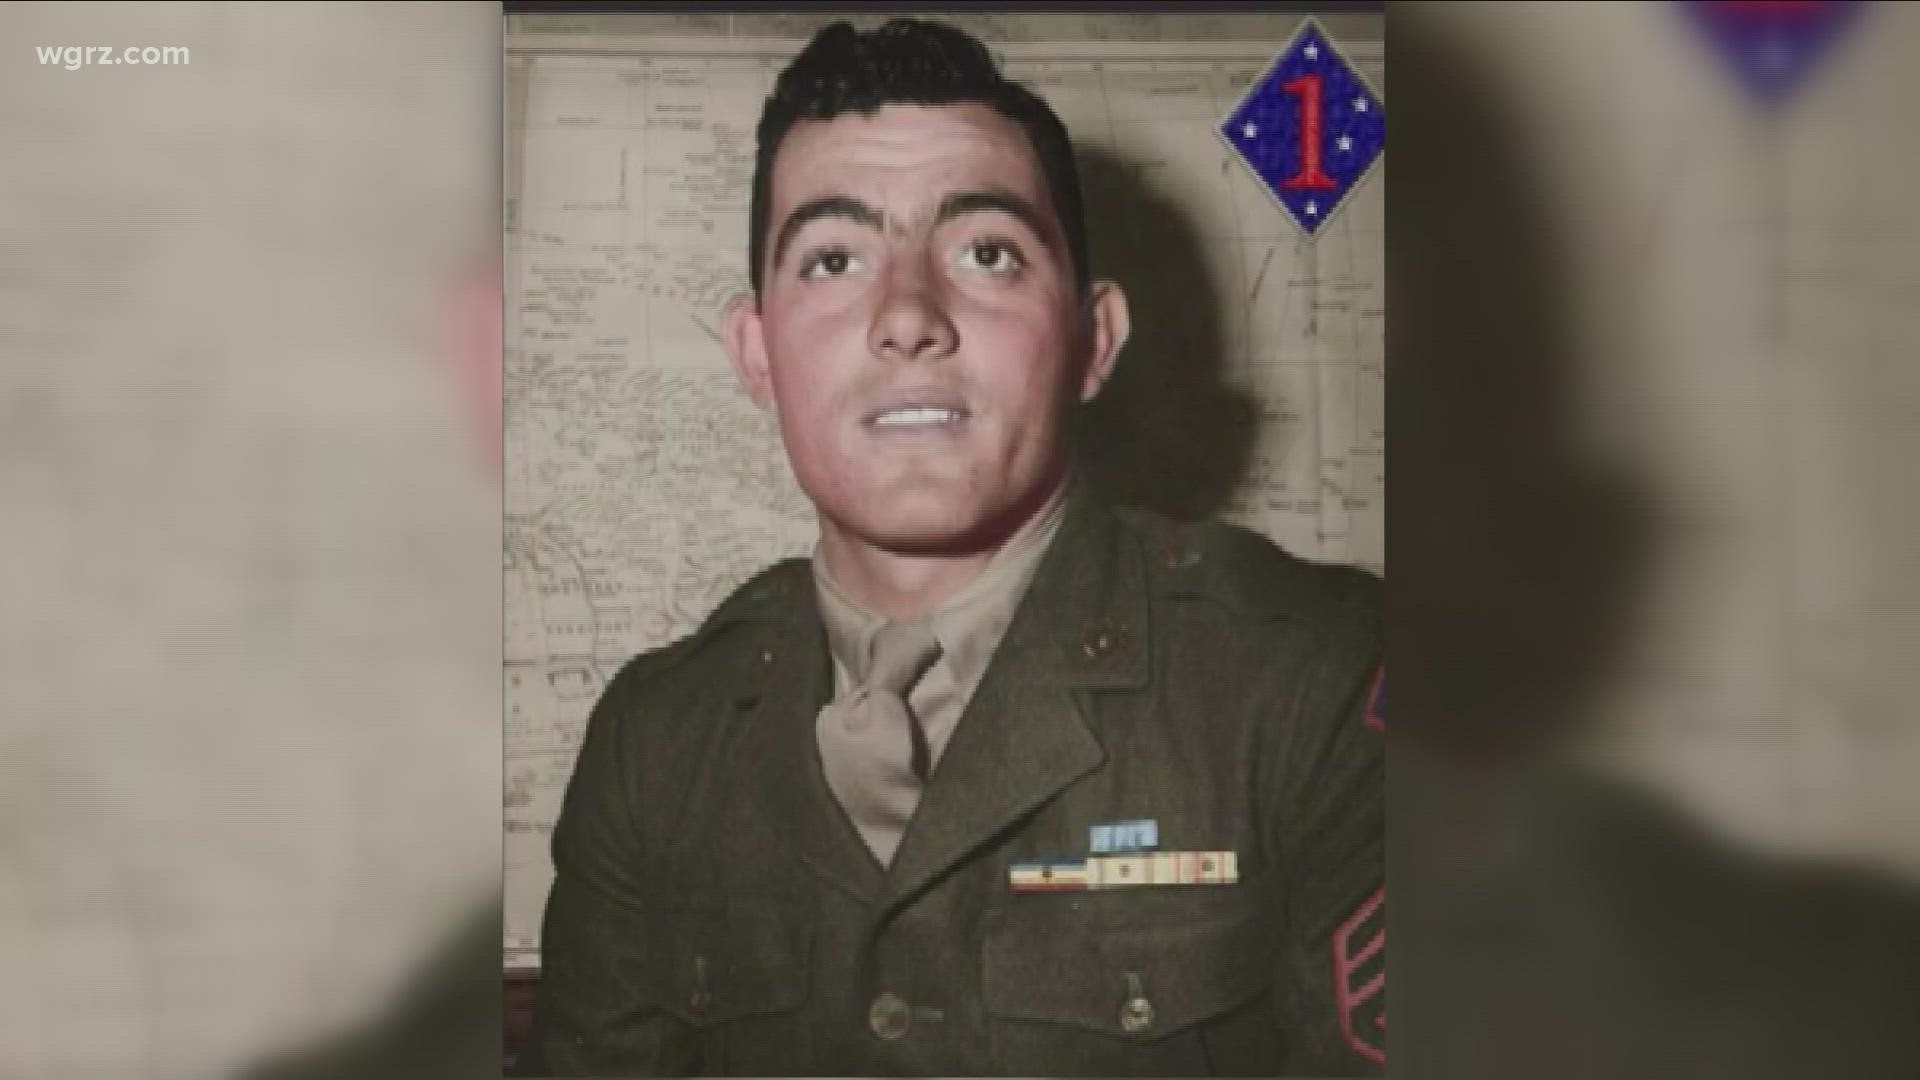 Jason Basilone was a hero in WWII and now the US Navy has christened a second ship in his name.